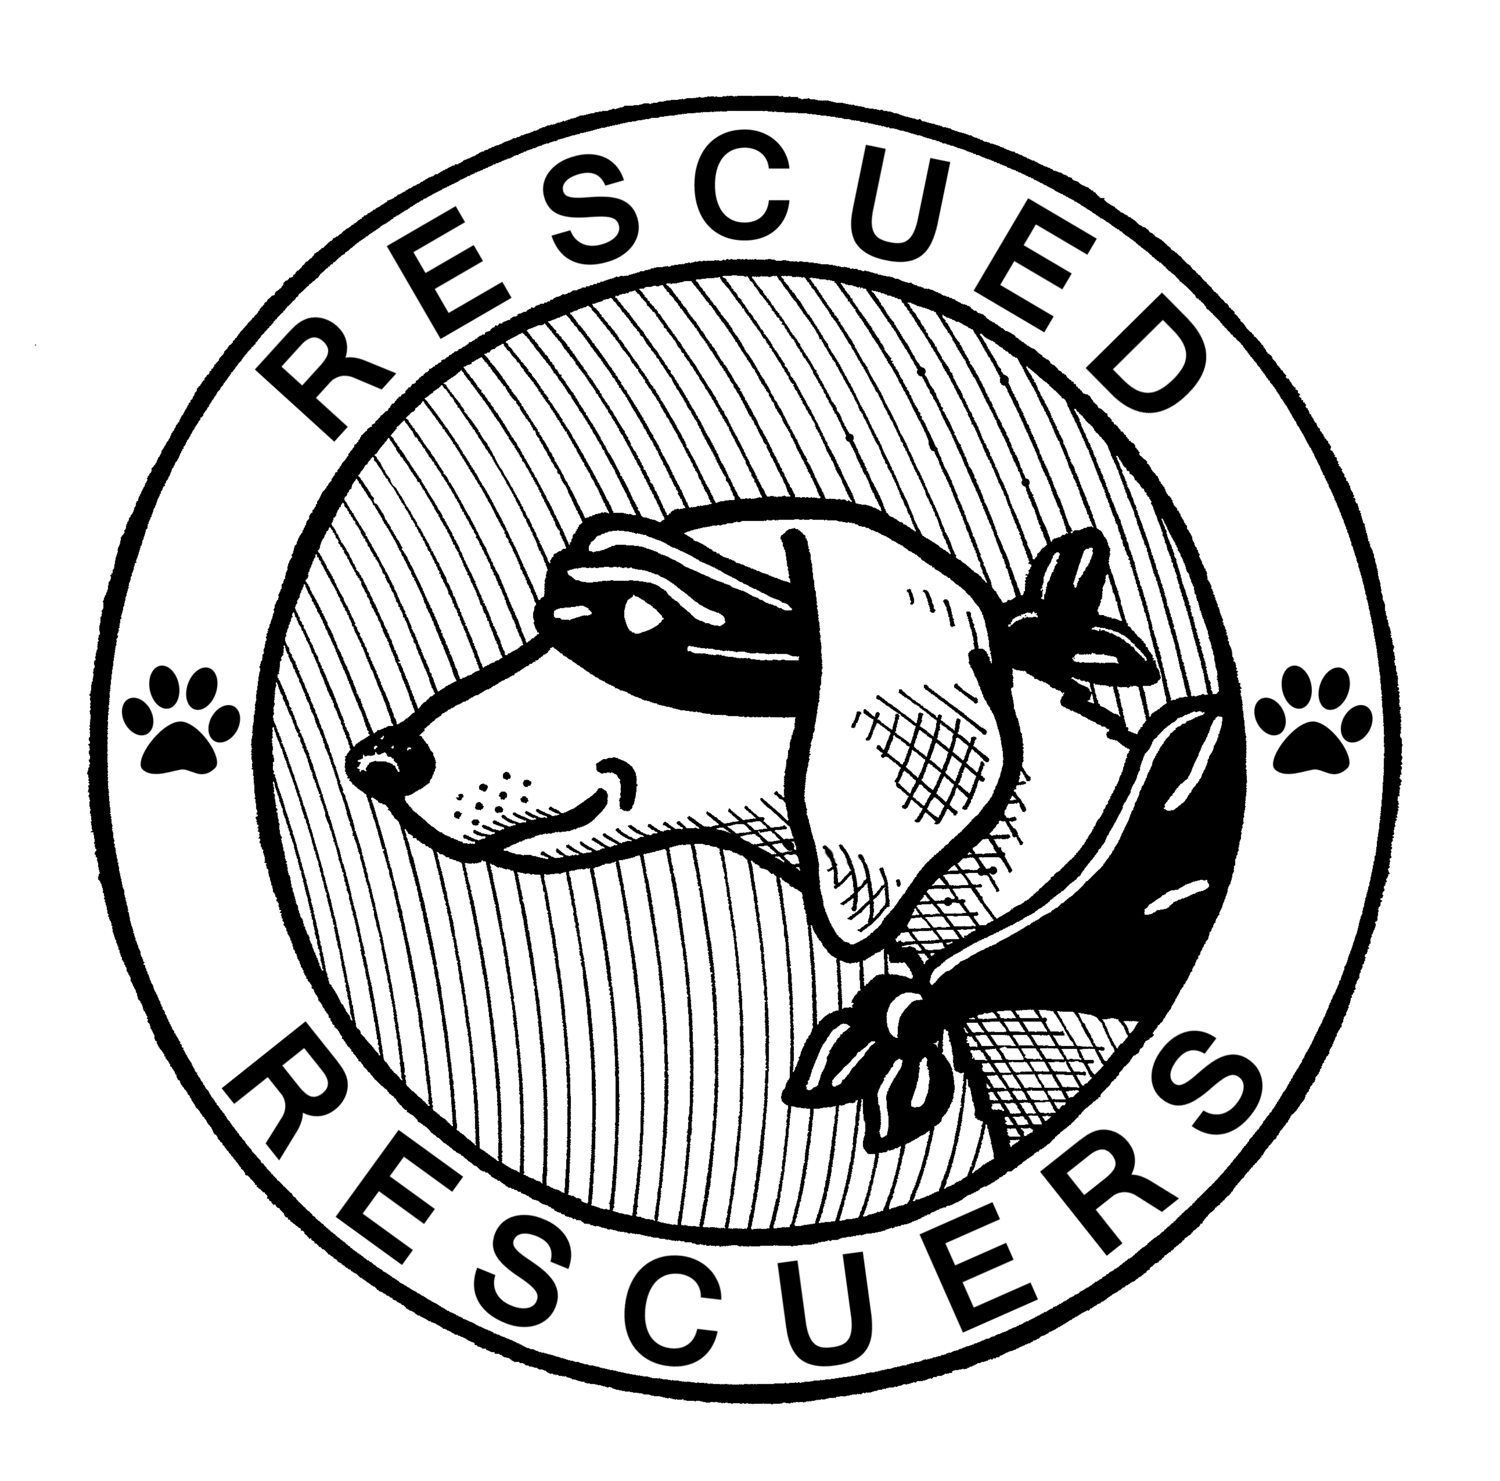 The Rescued Rescuers